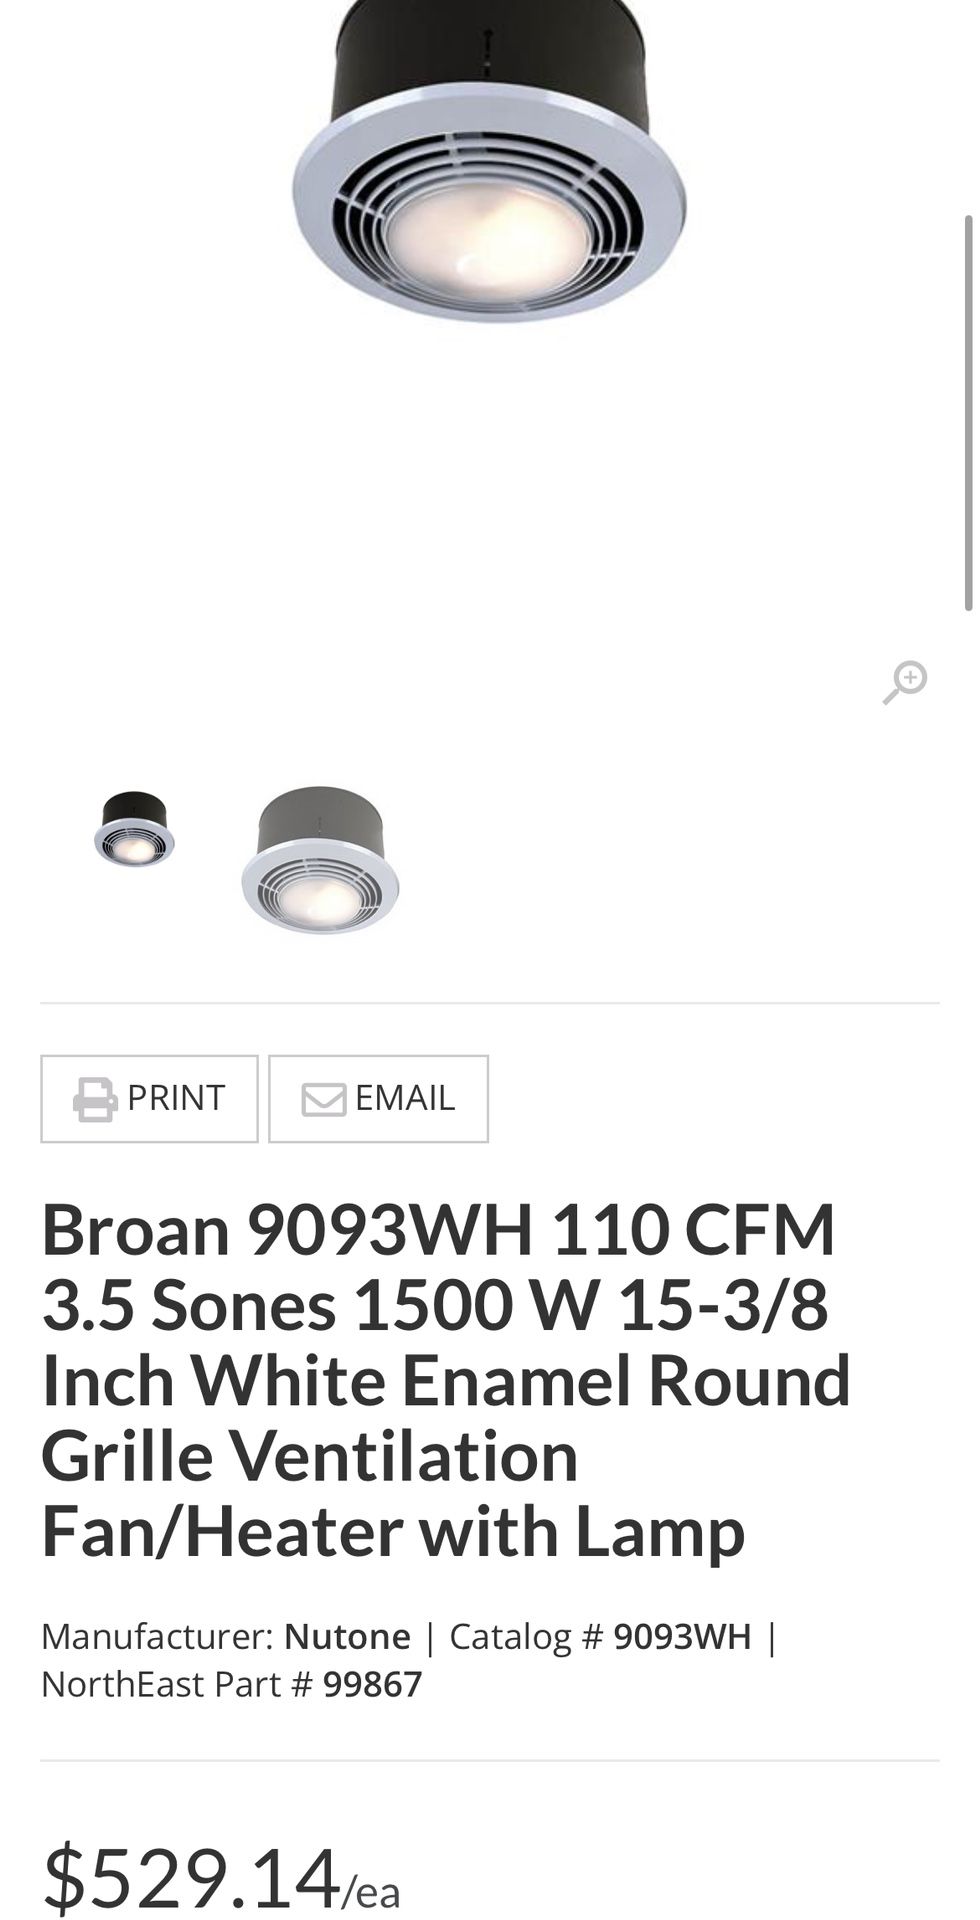 Broan 9093WH 110 CFM 3.5 Sones 1500 W 15-3/8 Inch White Enamel Round Grille Ventilation Fan/Heater with Lamp